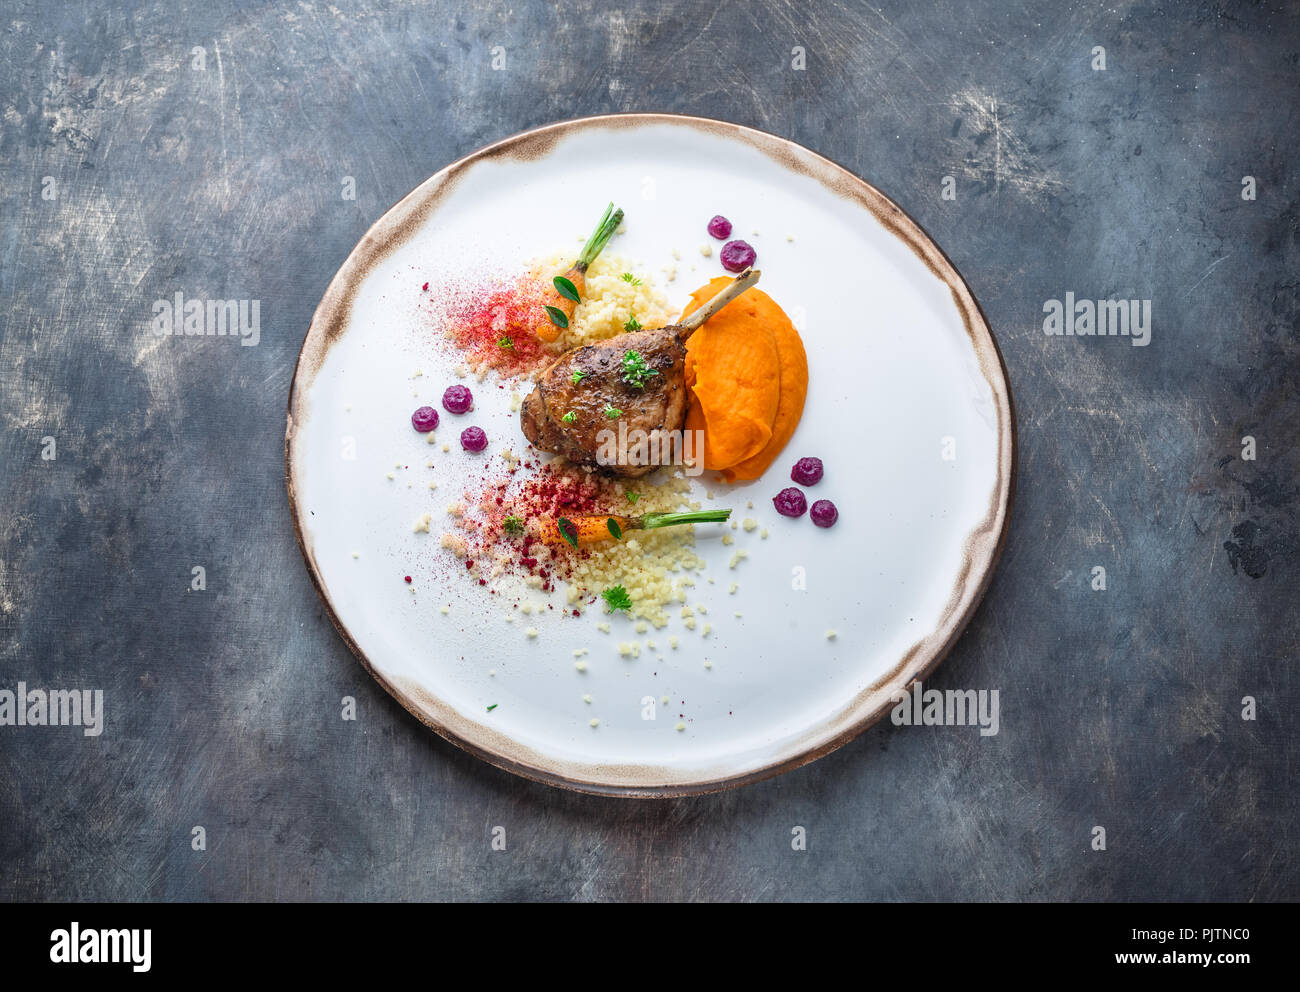 Duck leg confit with batat puree, carrots and couscous, restaurant meal Stock Photo